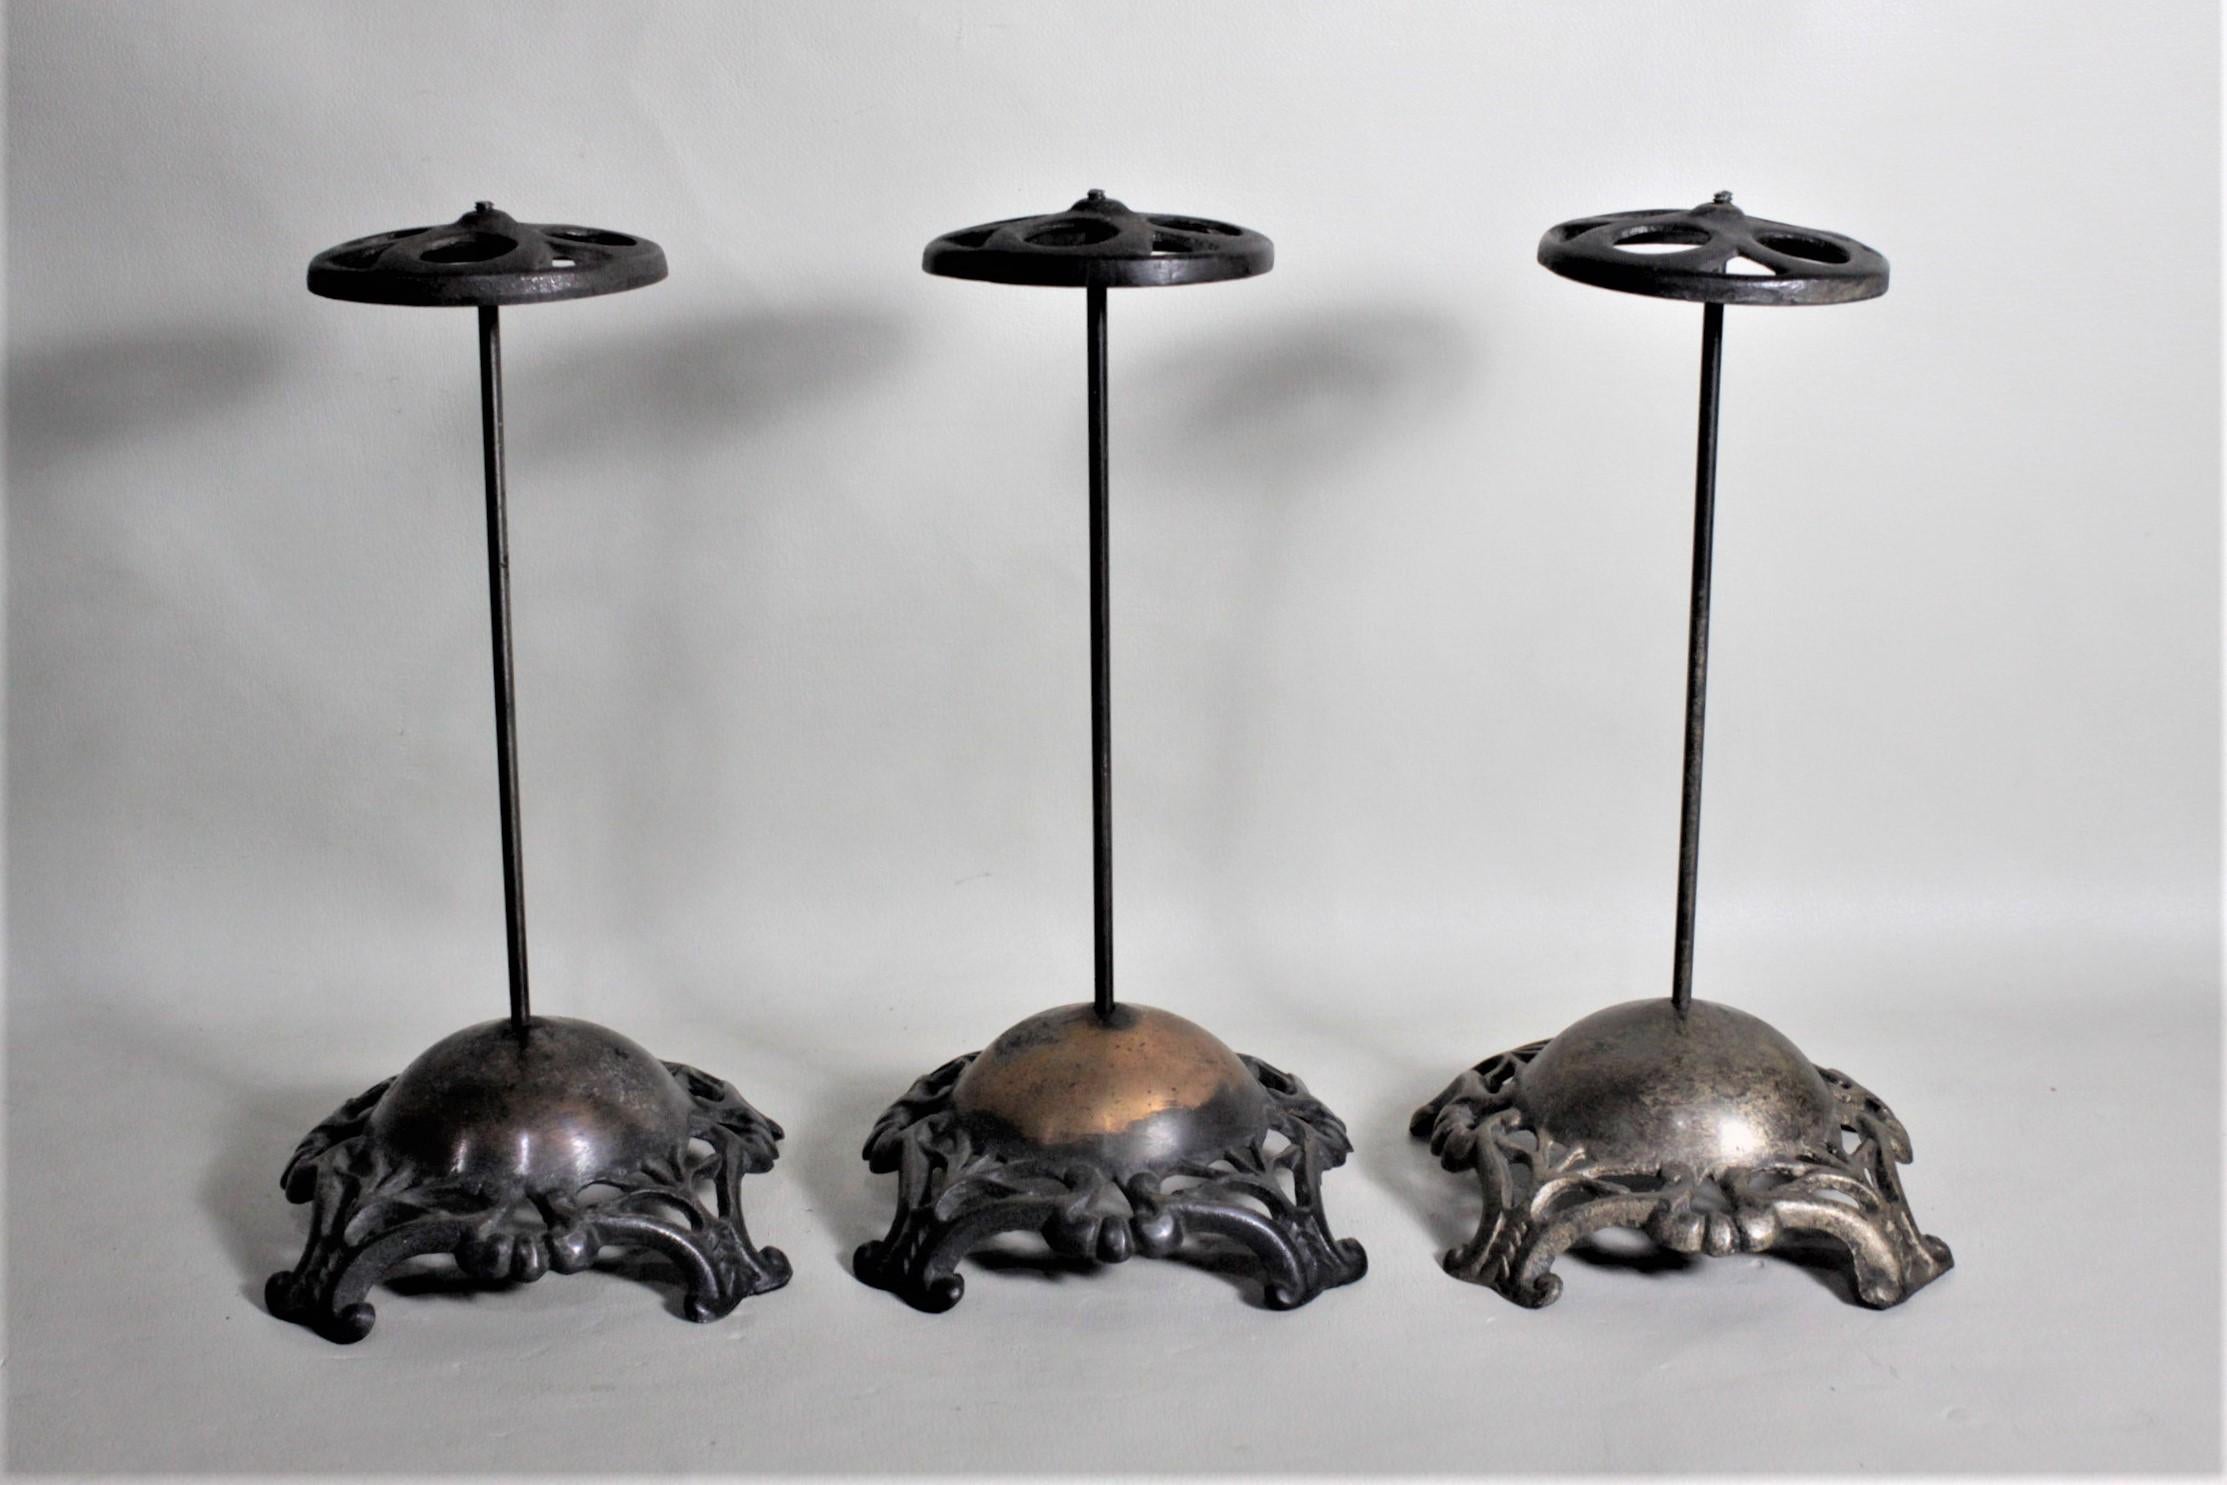 This set of three cast metal hat stands have no maker's marks but are presumed to have been made in the United States in circa 1880 in the period Victorian style. The stands have cast bases with a bronze patina and cast pierced tops. The stands are